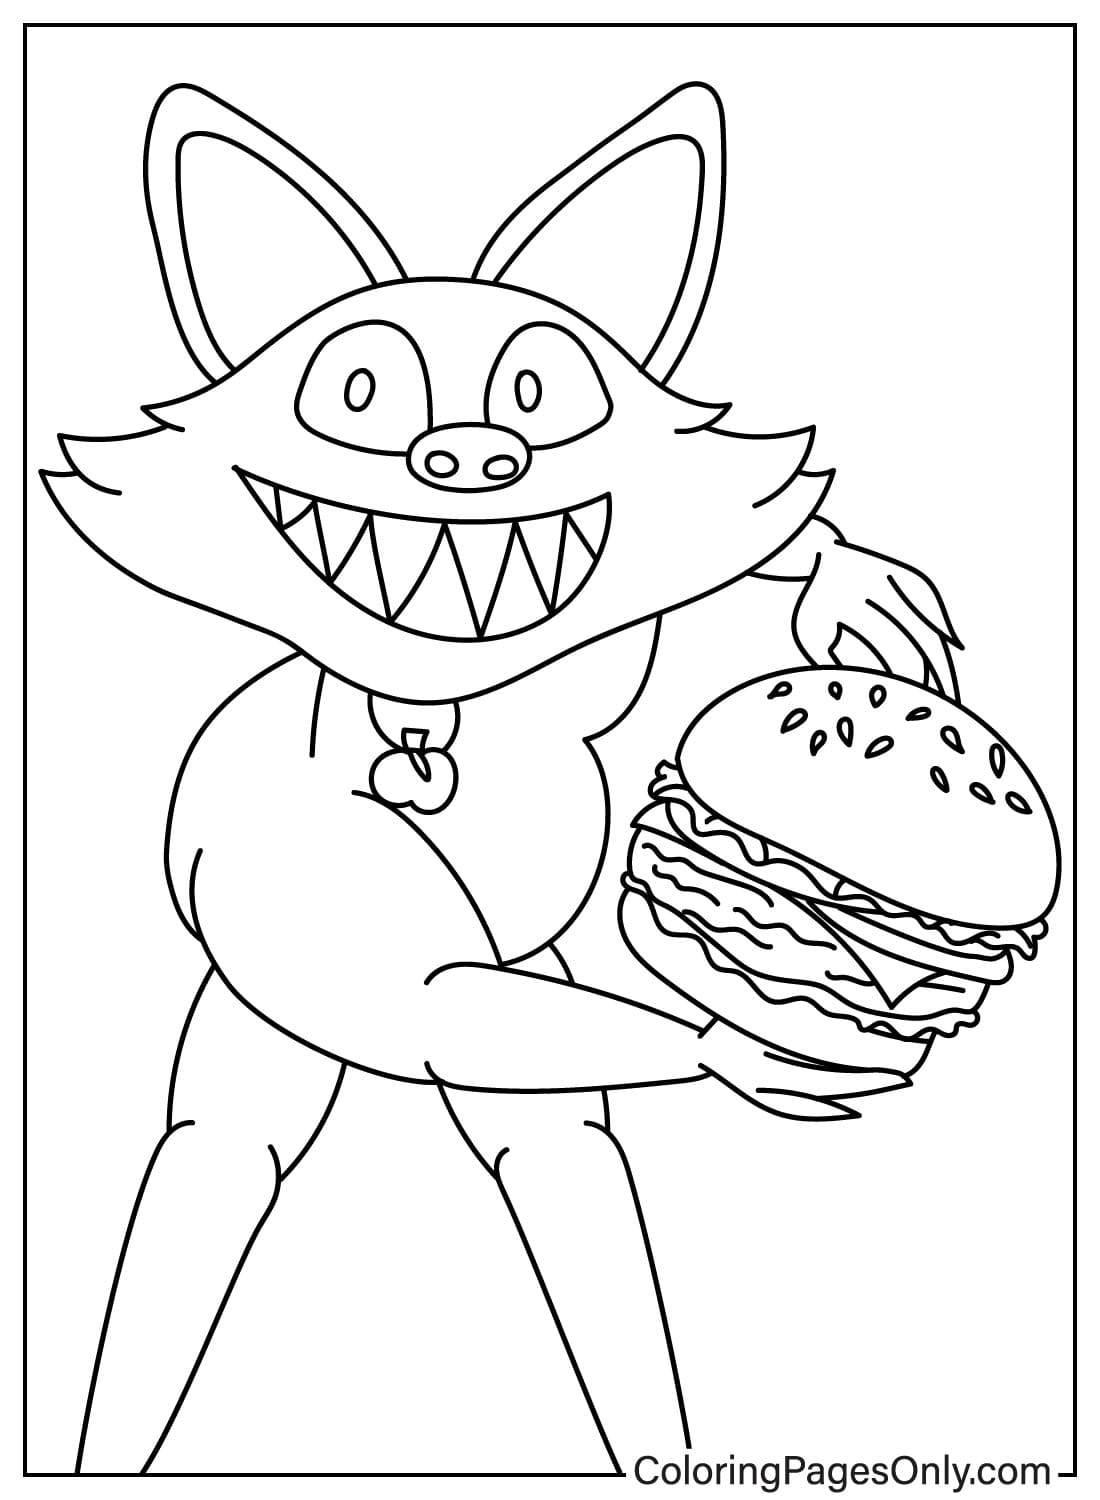 Zoonomaly Coloring Page JPG from Zoonomaly